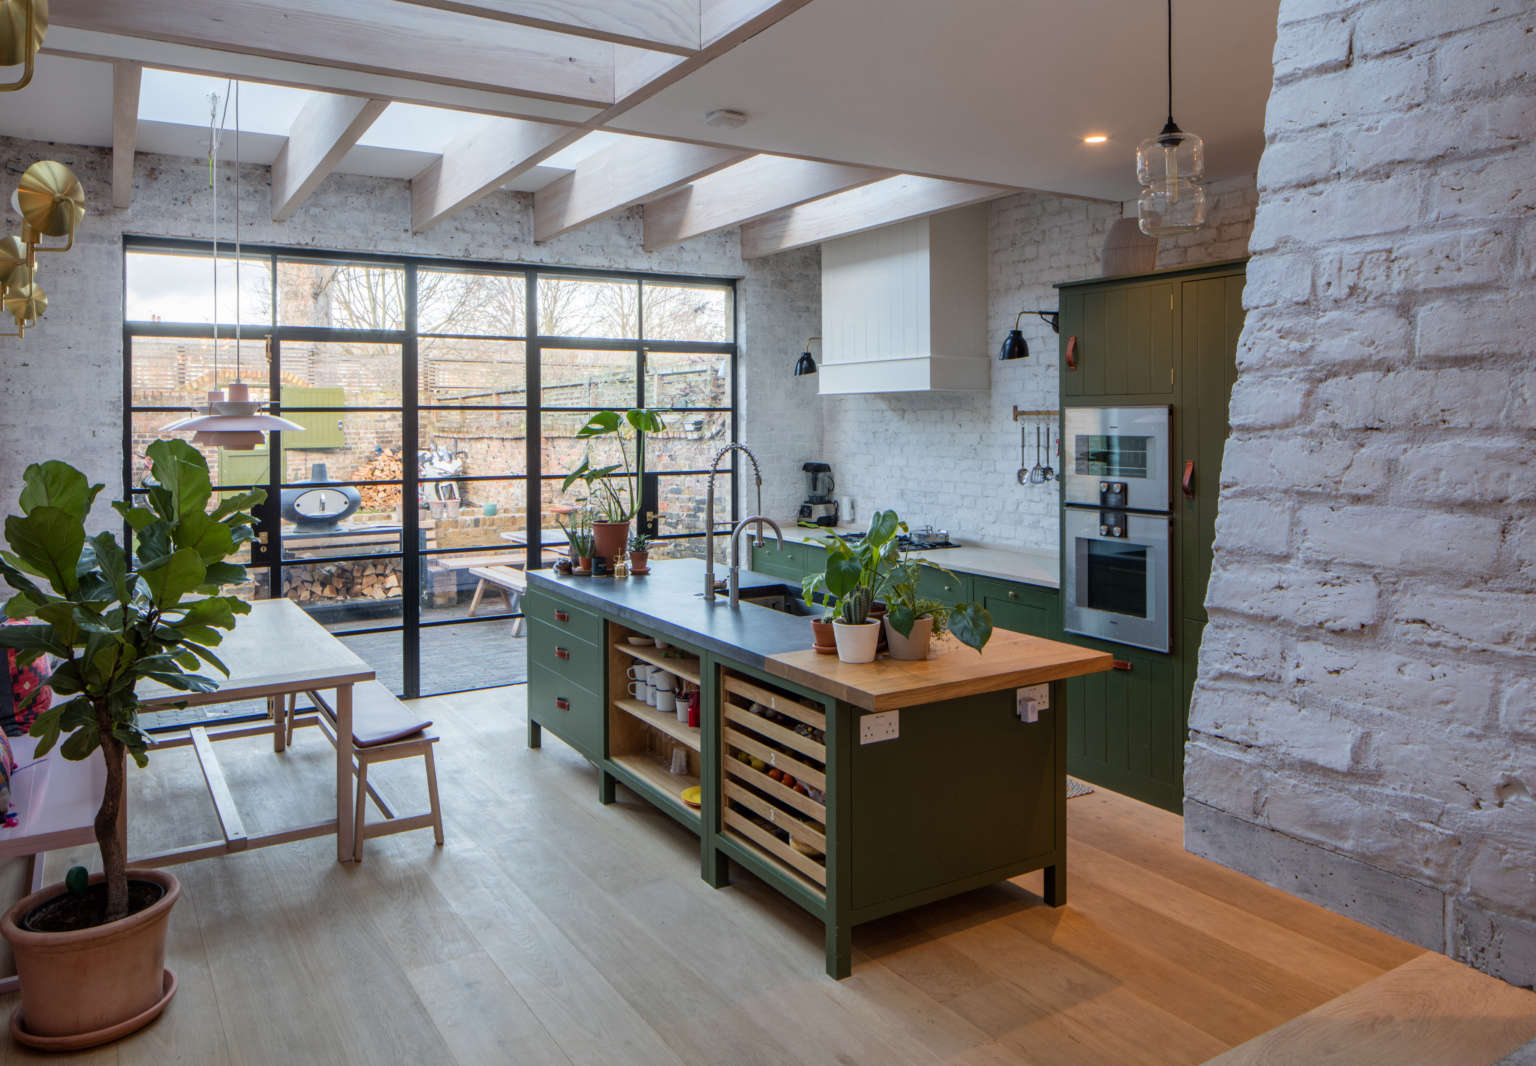 Kitchen of the Week A GreatestHits Kitchen for a DanishAmerican Couple in London portrait 3